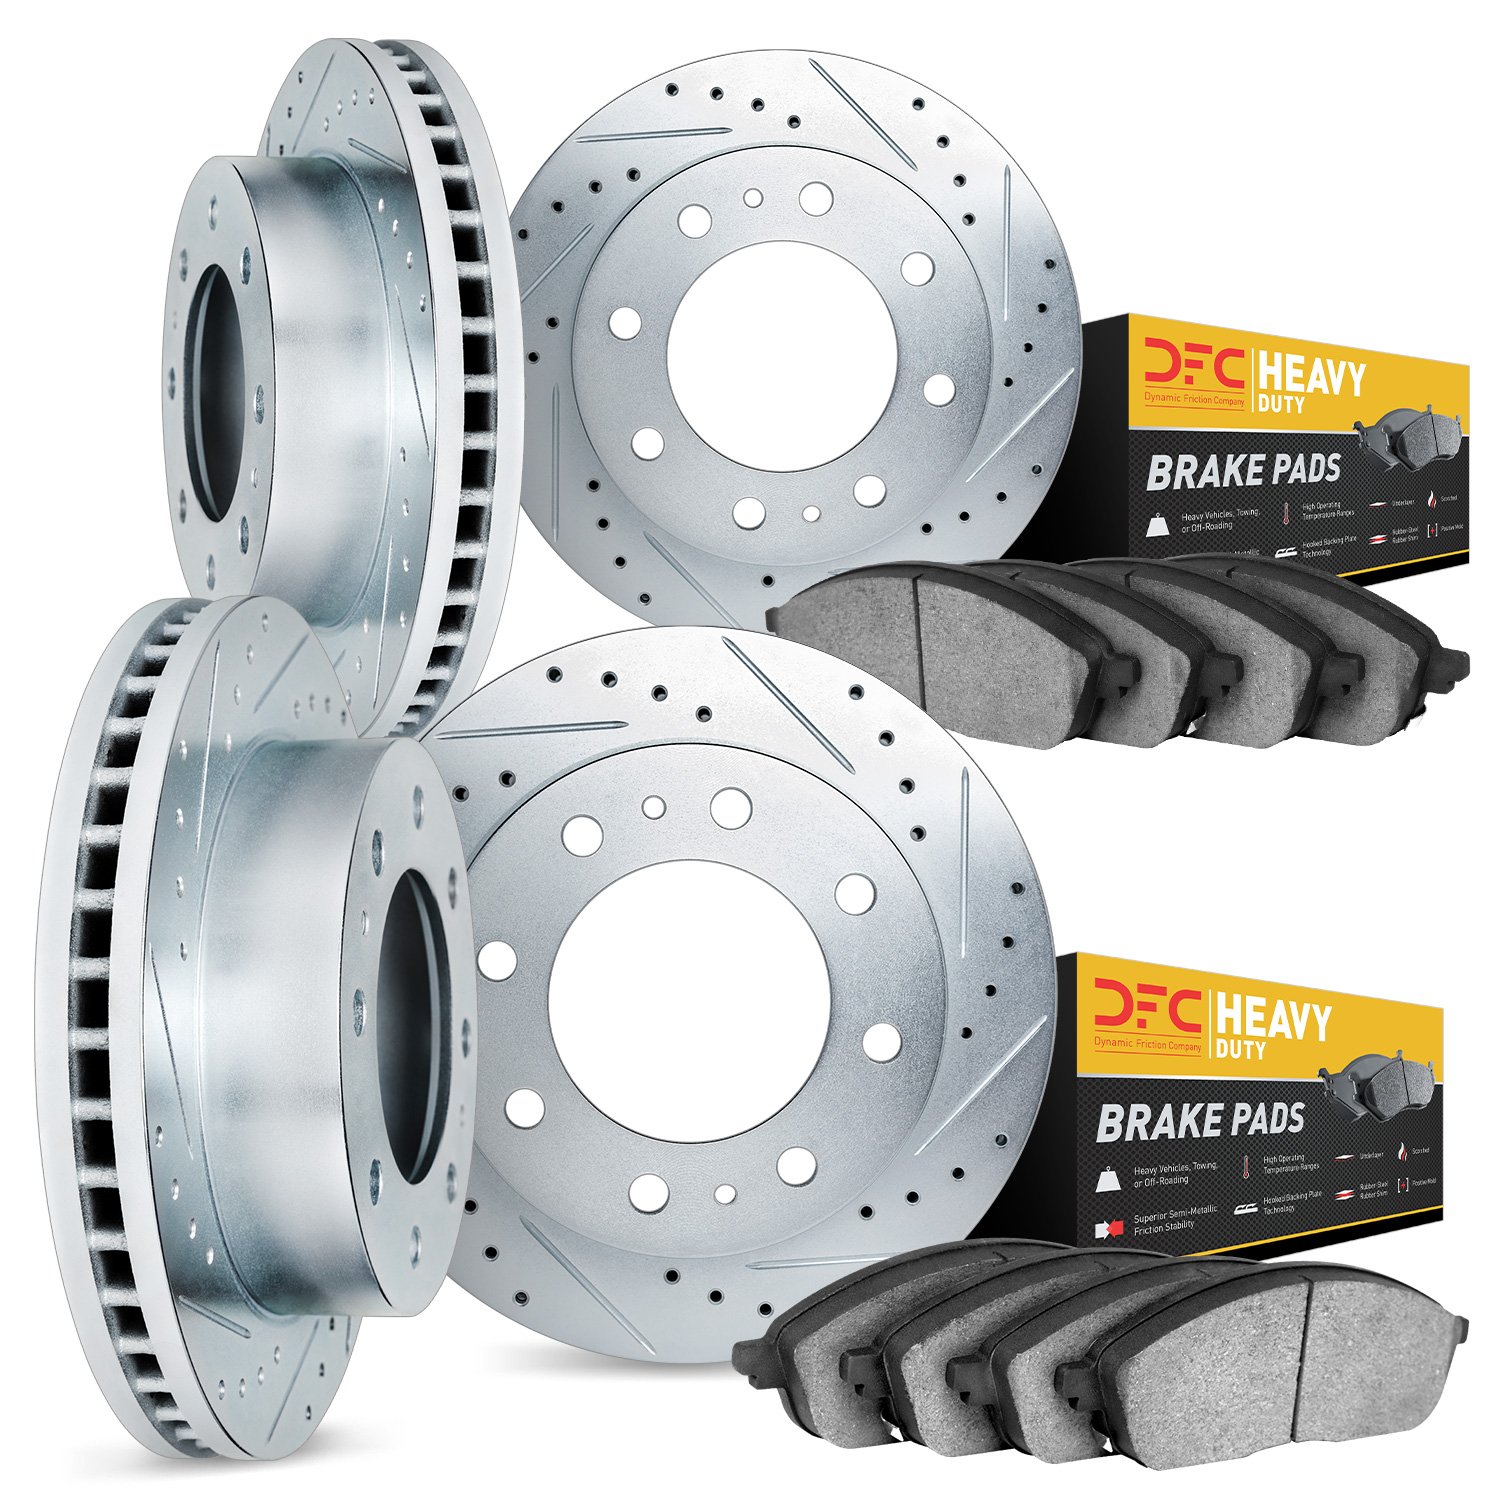 7204-99039 Drilled/Slotted Rotors w/Heavy-Duty Brake Pads Kit [Silver], 1999-2004 Ford/Lincoln/Mercury/Mazda, Position: Front an